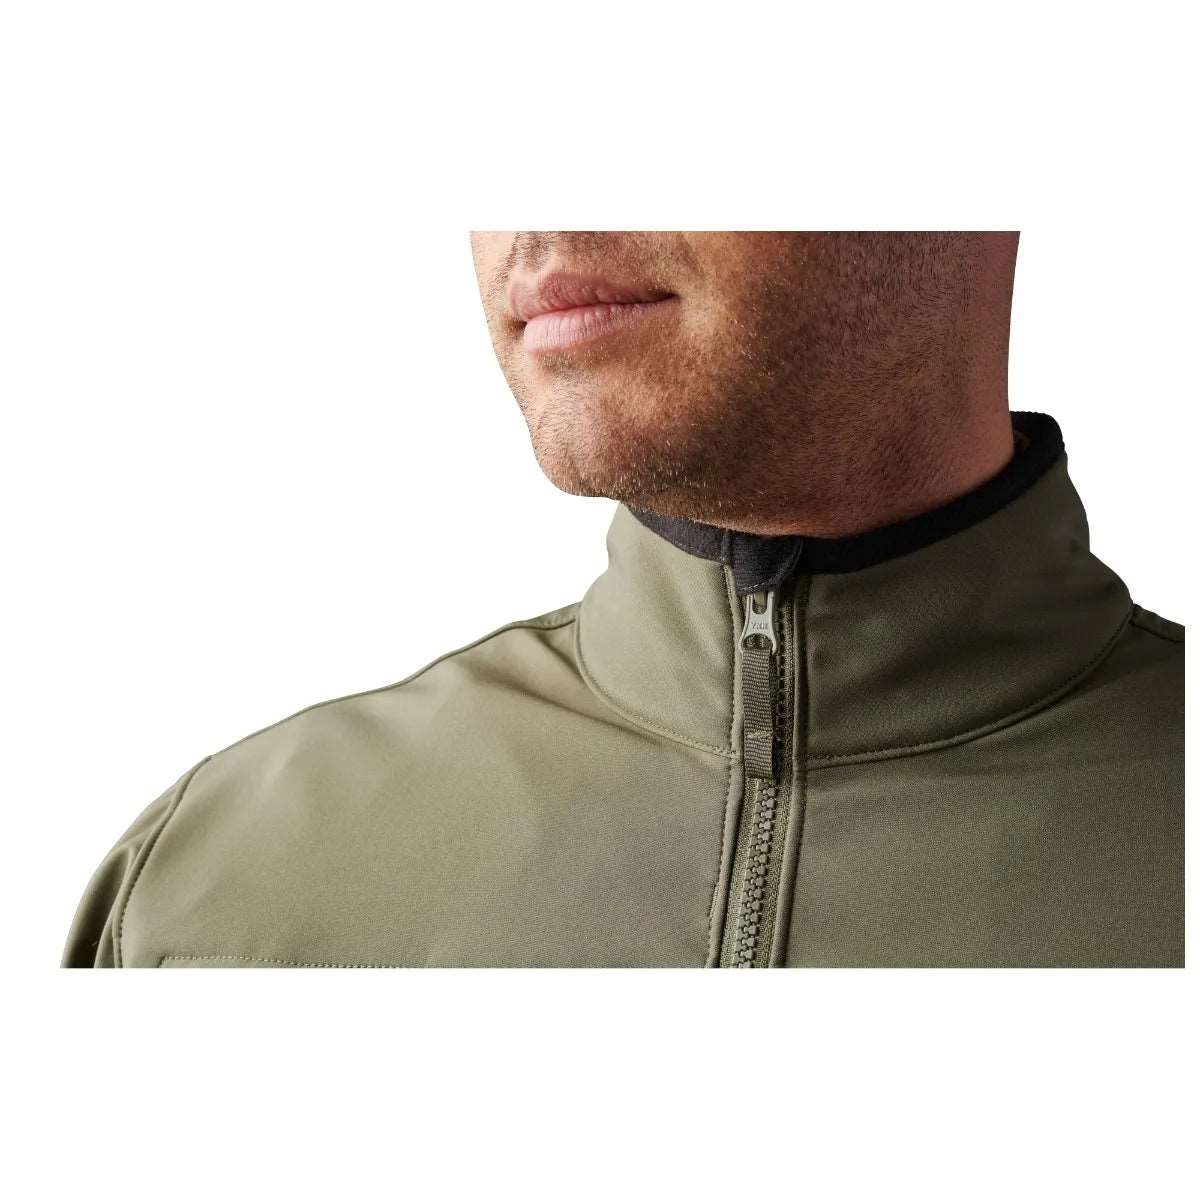 Outerwear - 5.11 Tactical Chameleon Softshell 2.0 Jacket